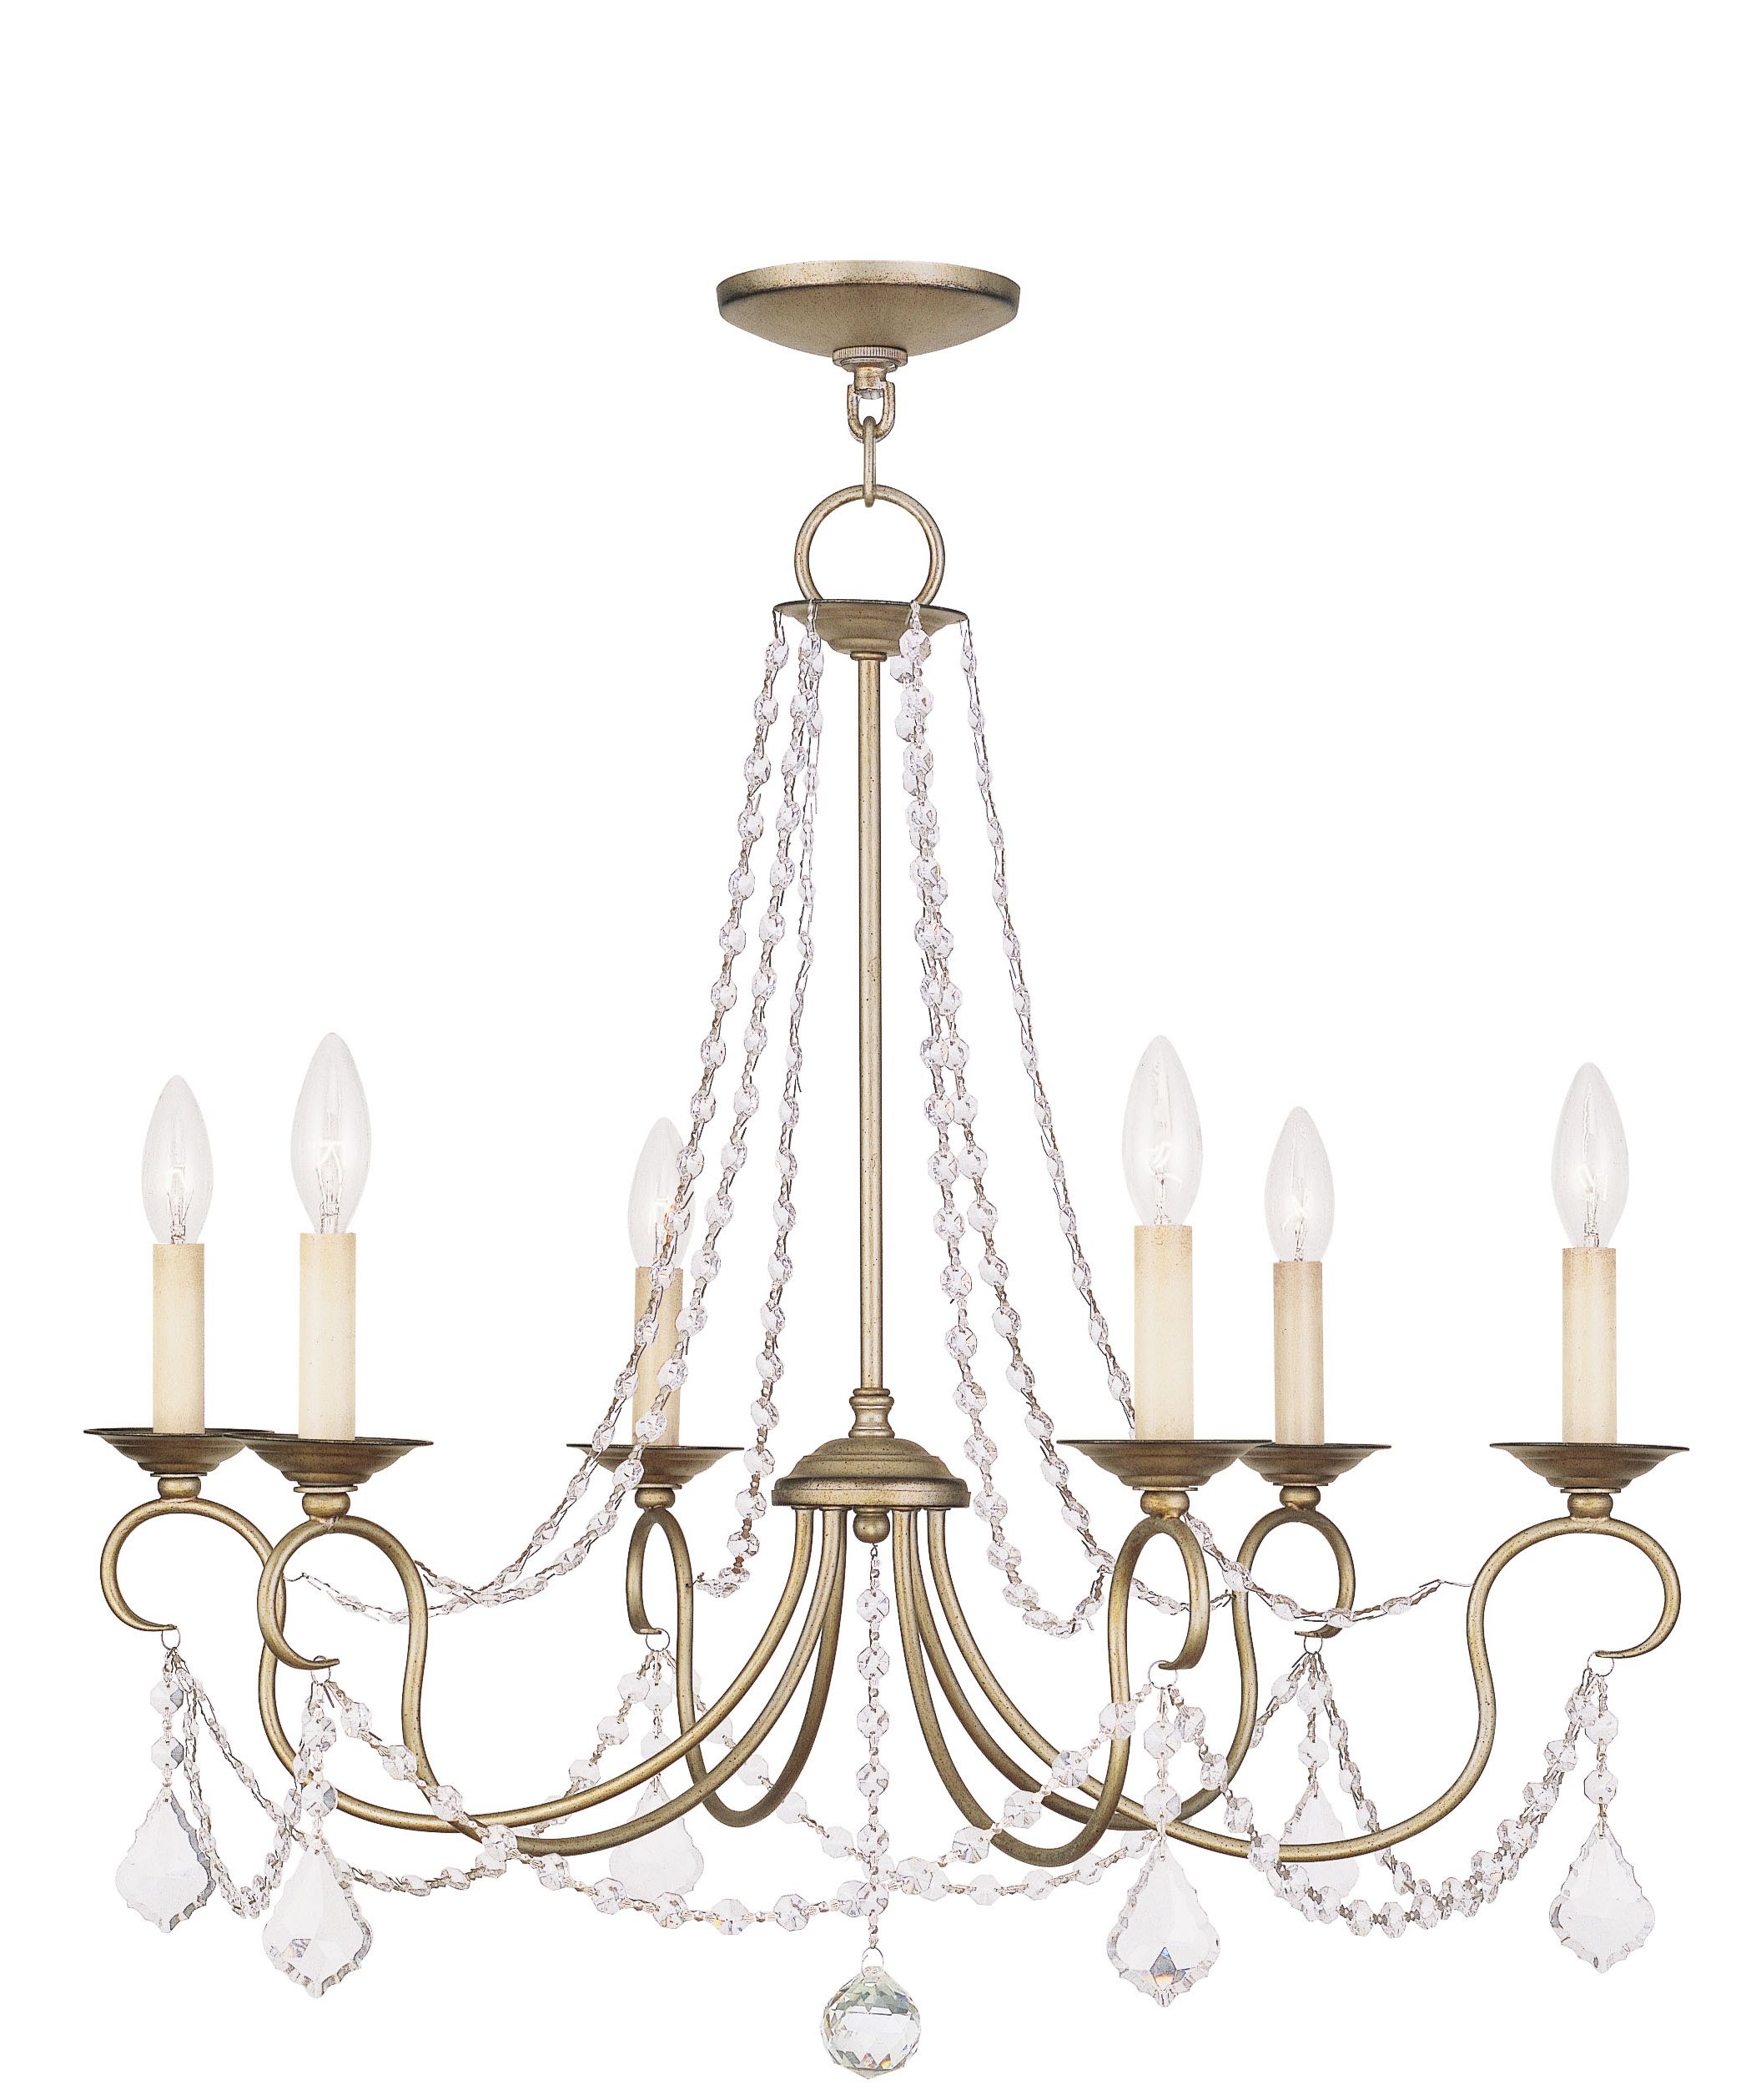 Most Recently Released Livex Lighting Pennington Chandelier Hand Painted Antique Throughout Four Light Antique Silver Chandeliers (View 5 of 20)